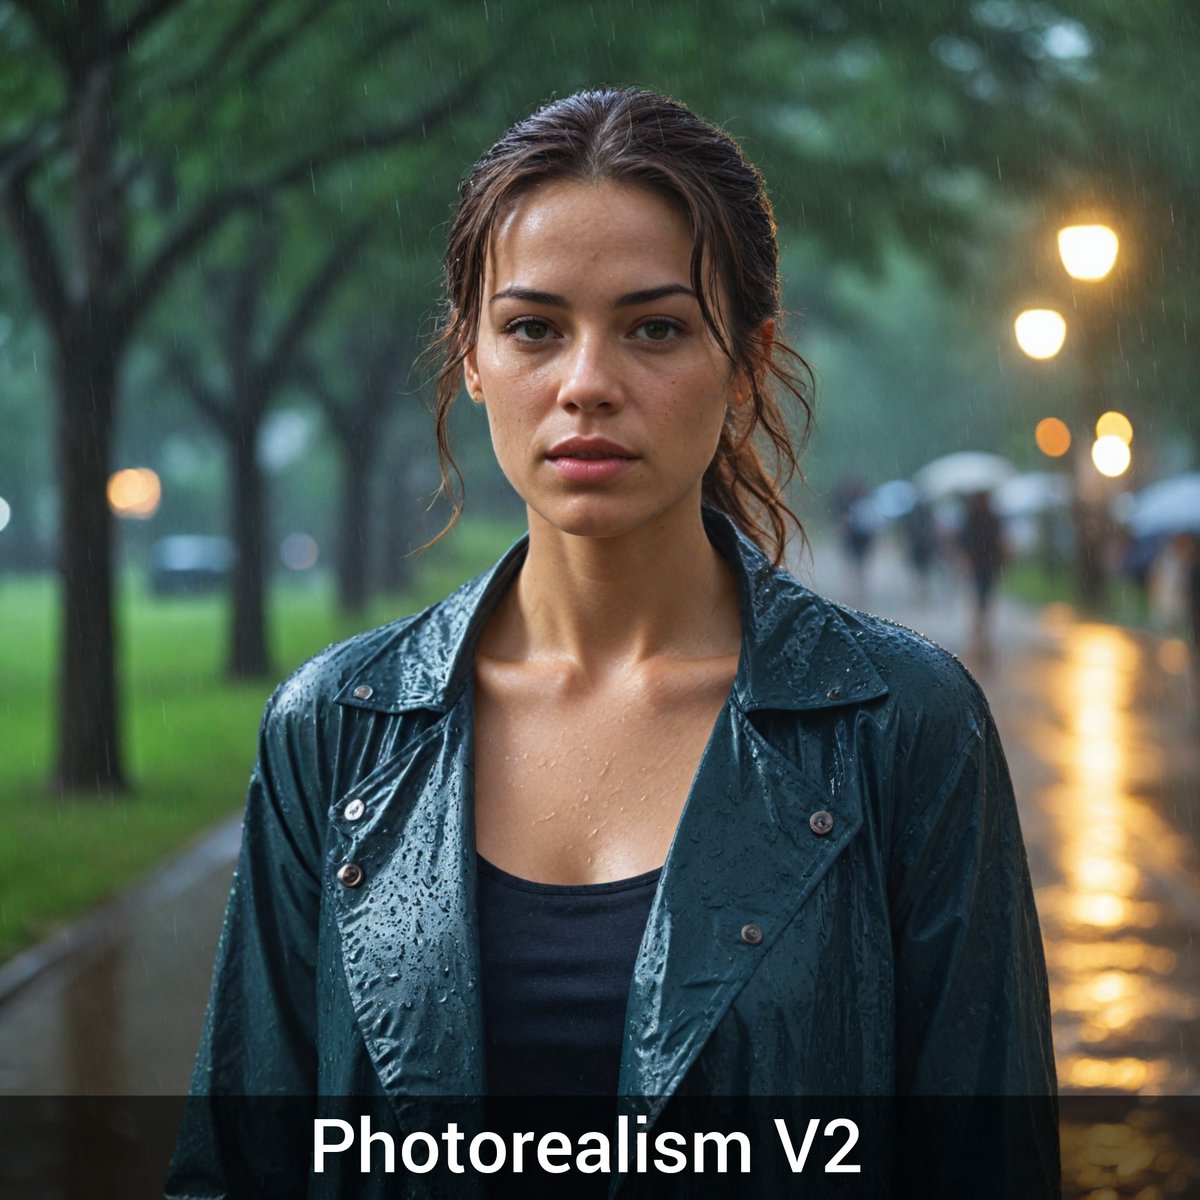 The Photorealism V2 model from @getimg_ai  generates excellent images and is highly useful.

The platform's features are worth exploring. I collaborated with them to bring you this post.

If you like this, check out their site here!

getimg.ai/?utm_source=tw…

Thank you for